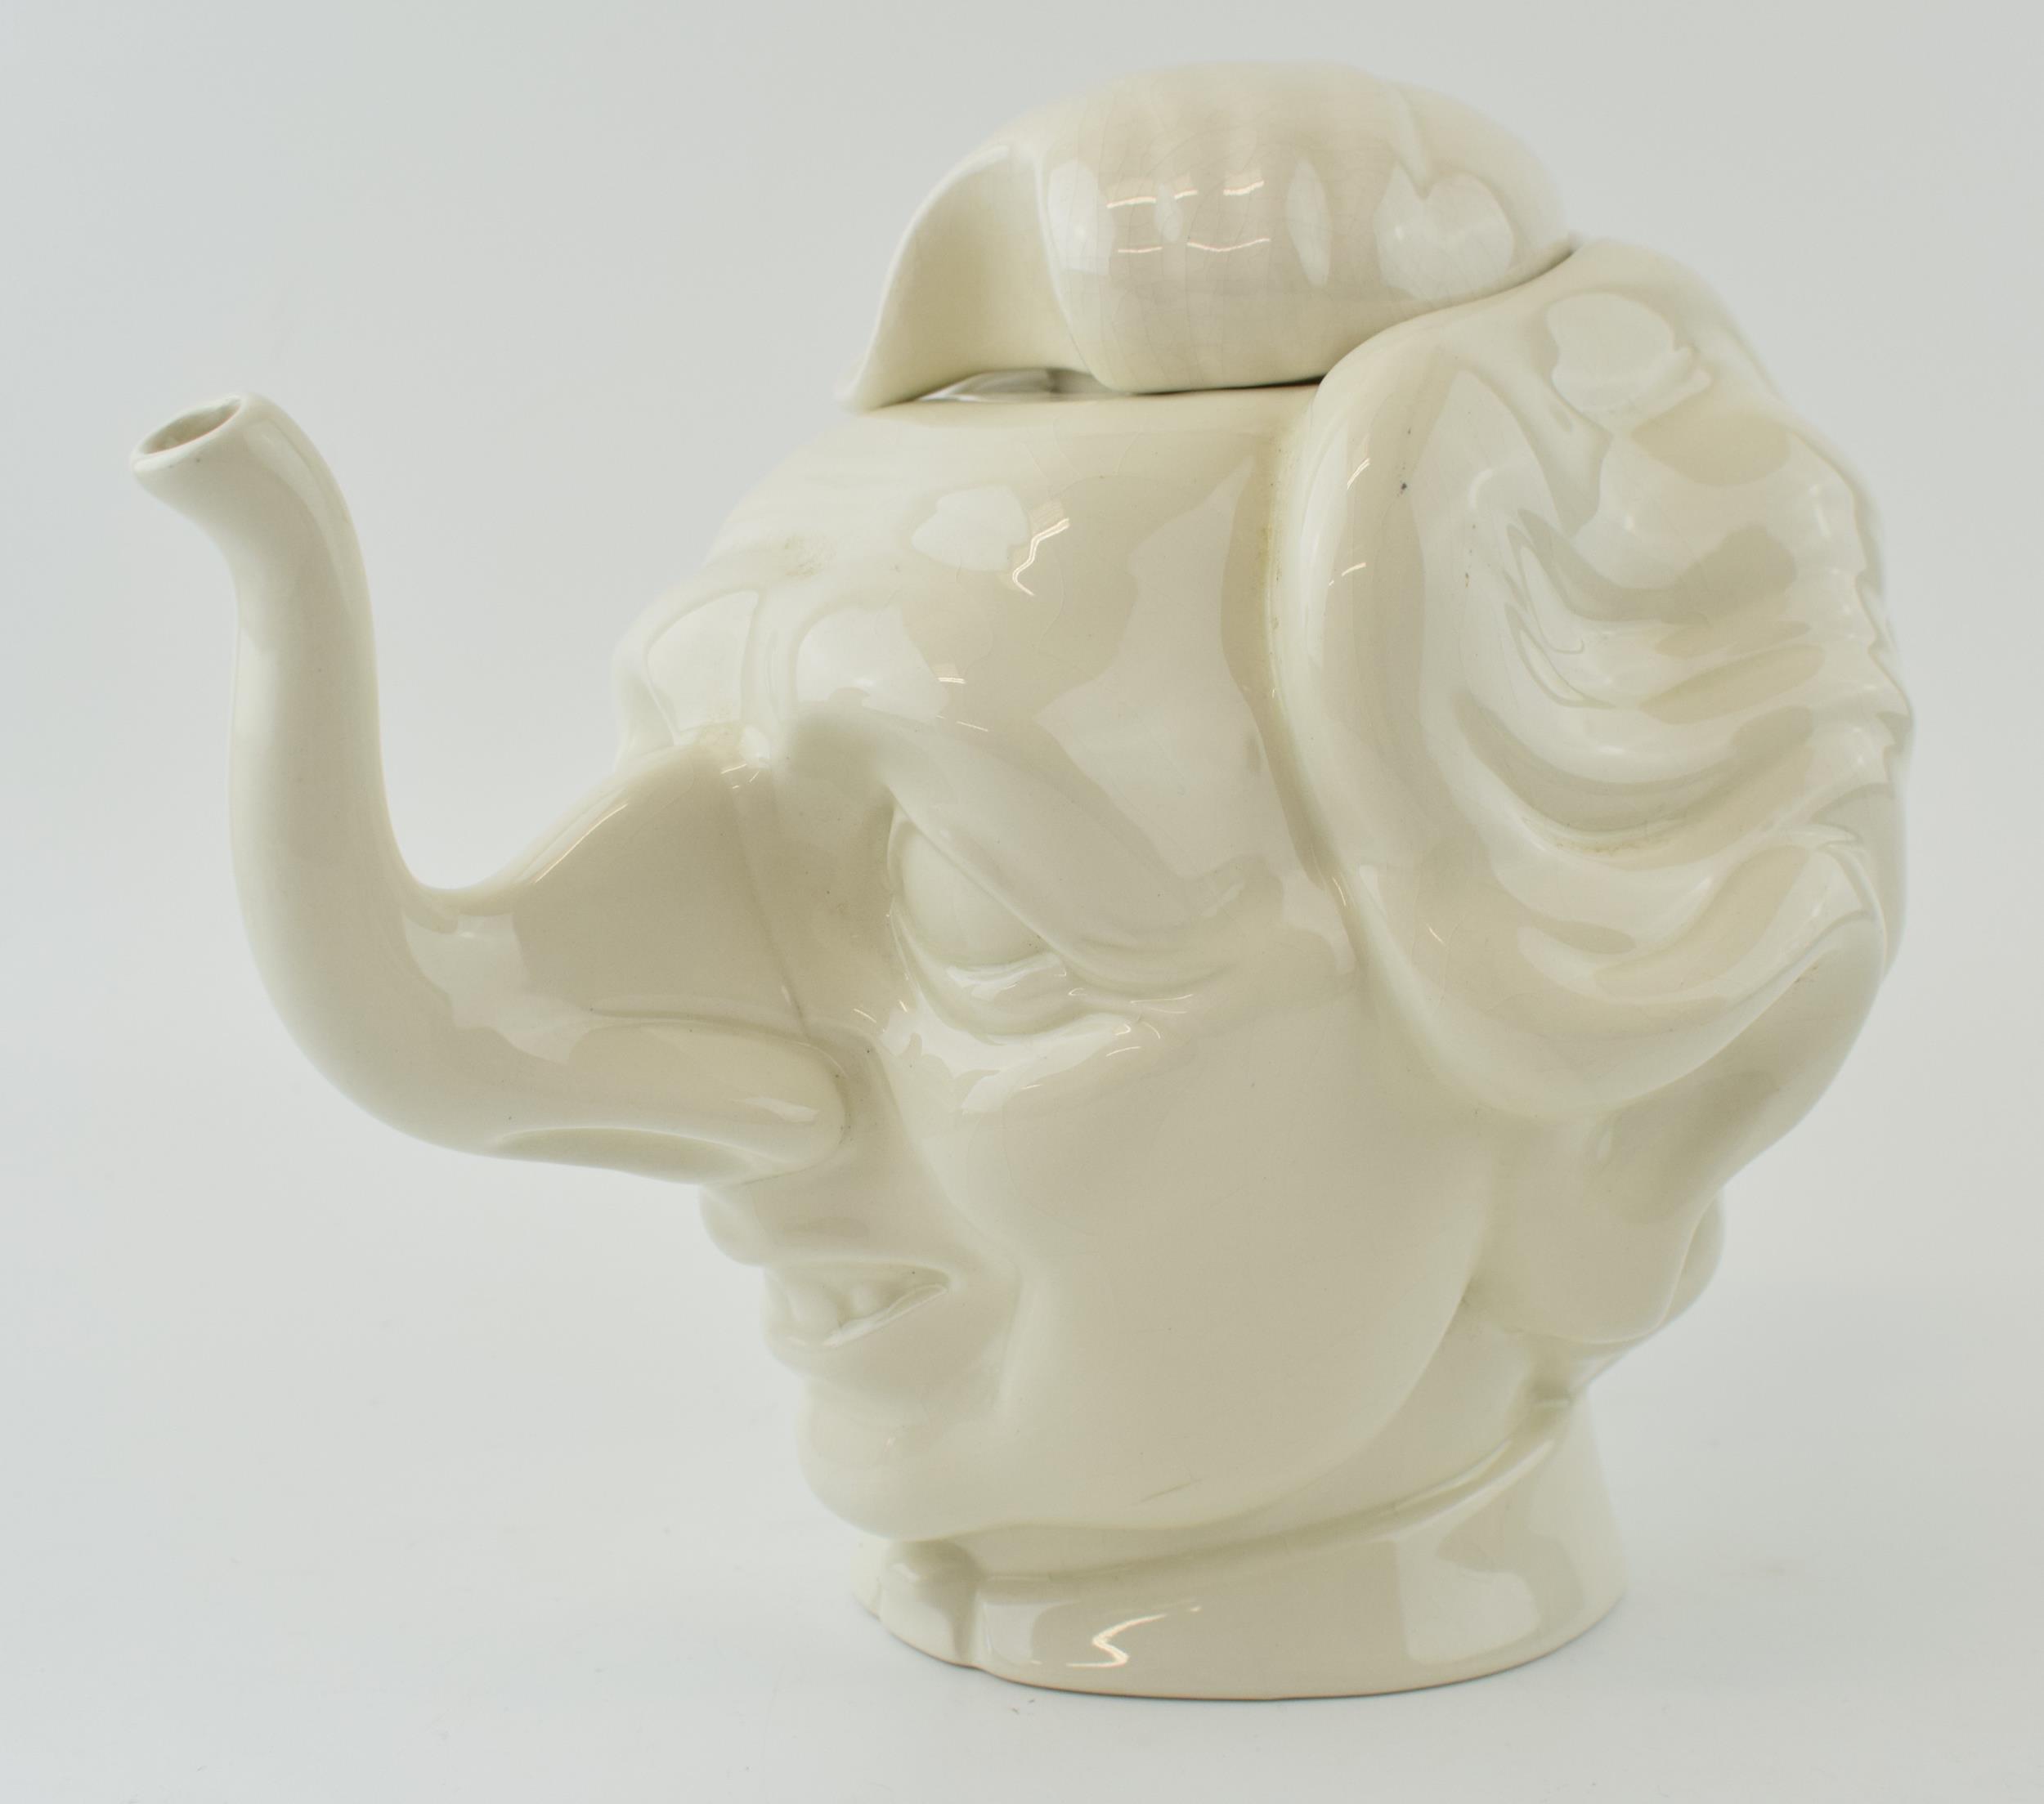 Spitting Image Margaret Thatcher teapot by Fluck and Law, made by Carlton Ware, unmarked, 31cm long.